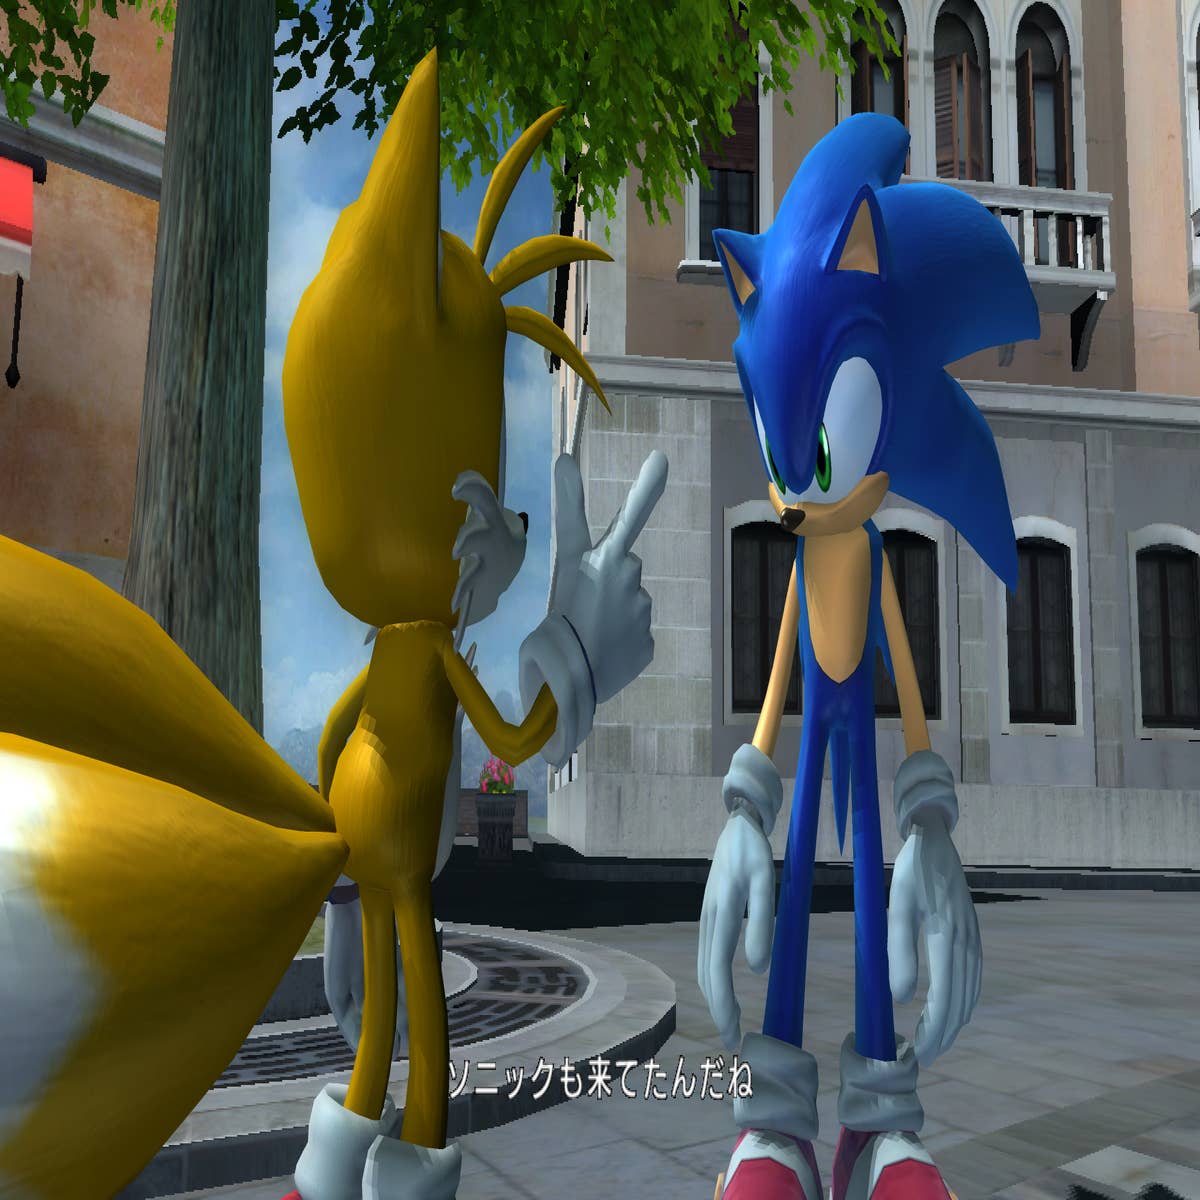 Xbox 360 - Sonic the Hedgehog (2006) - Super Sonic - The Models